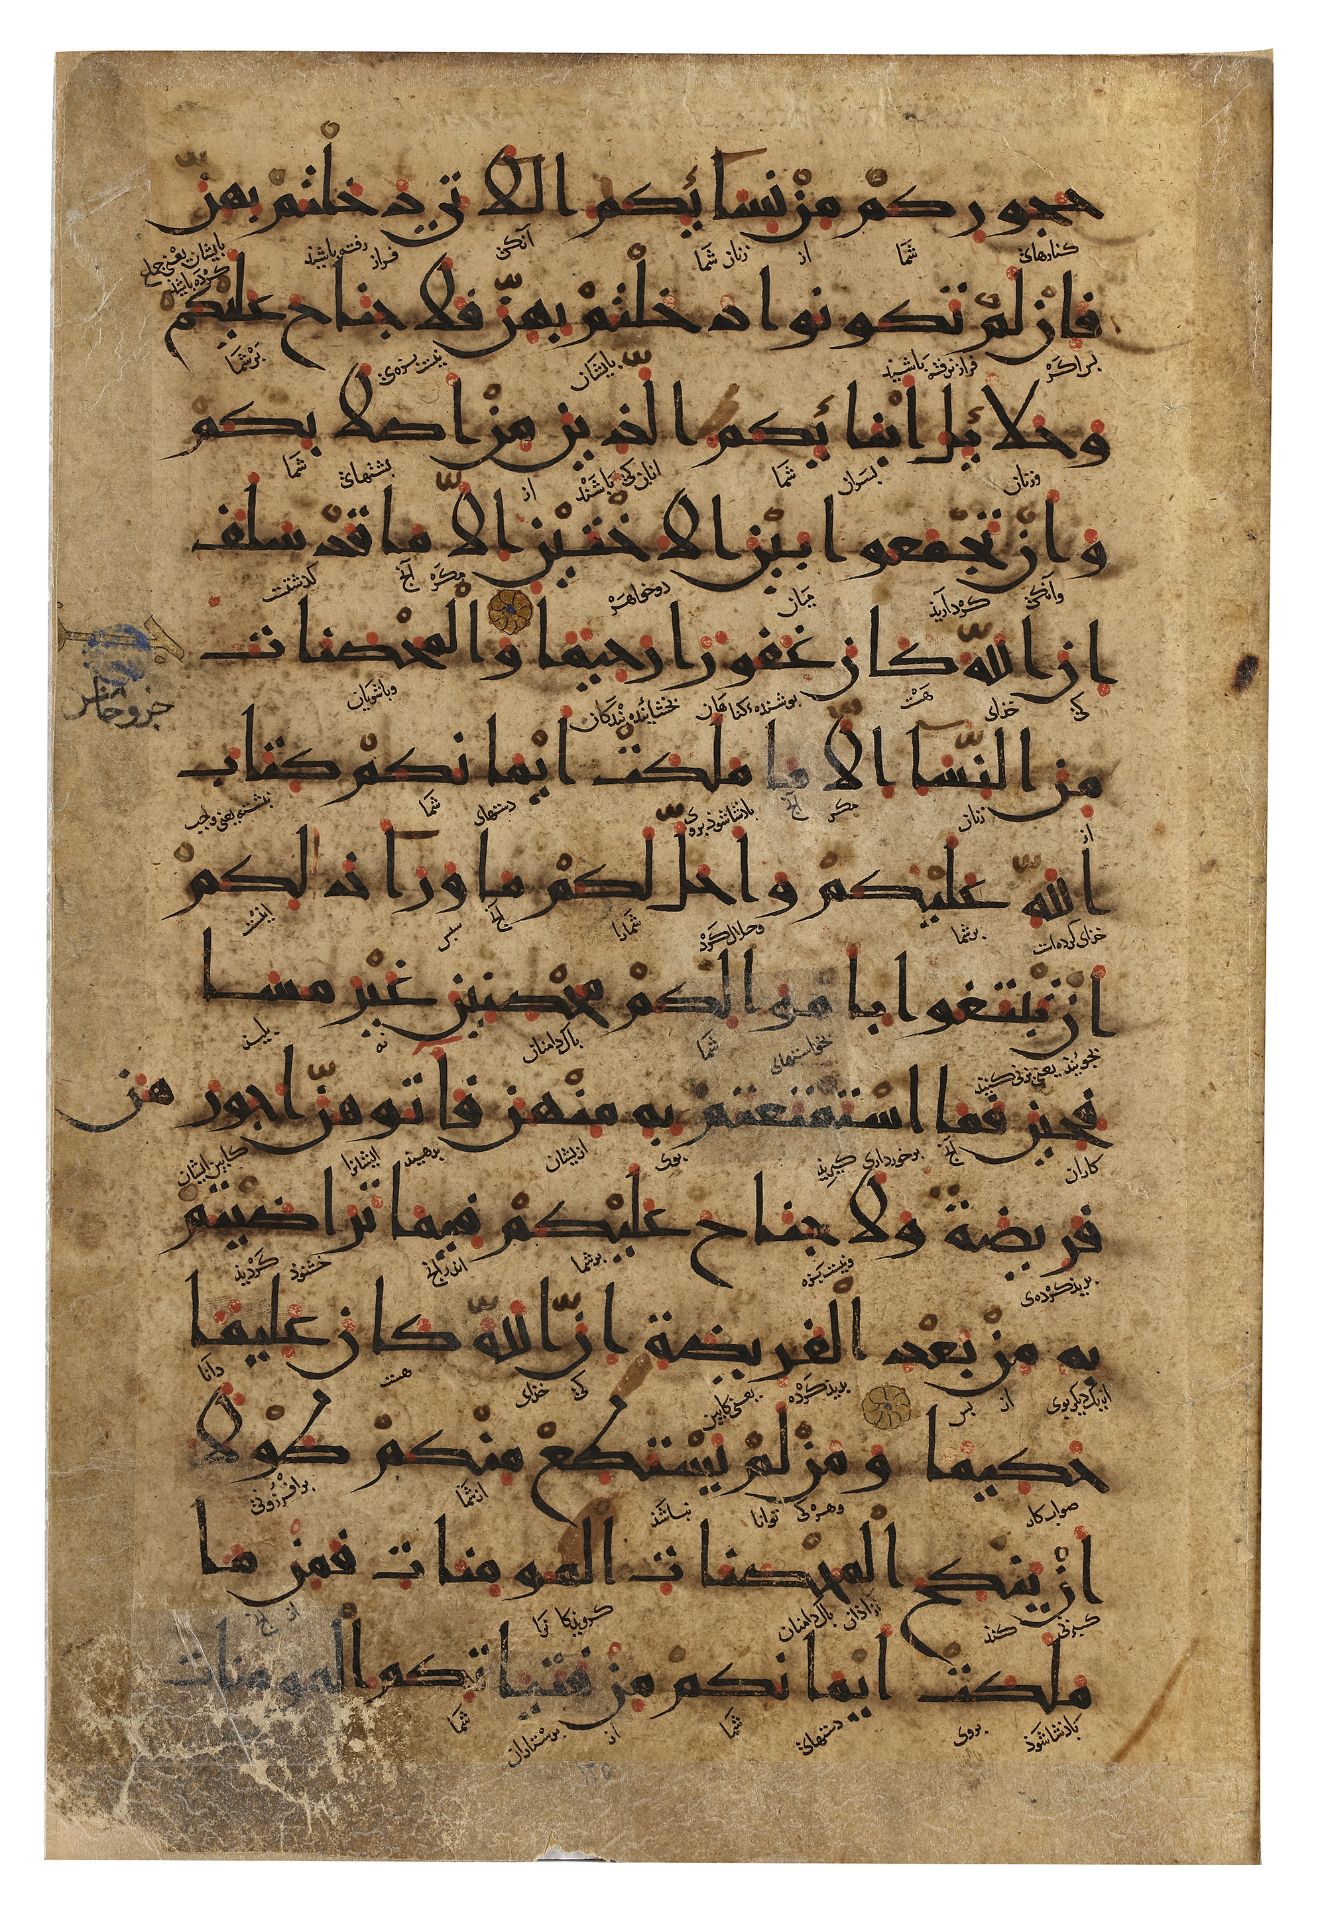 AN EASTERN KUFIC QURAN FOLIO, NEAR EAST, 12TH CENTURY - Image 4 of 4